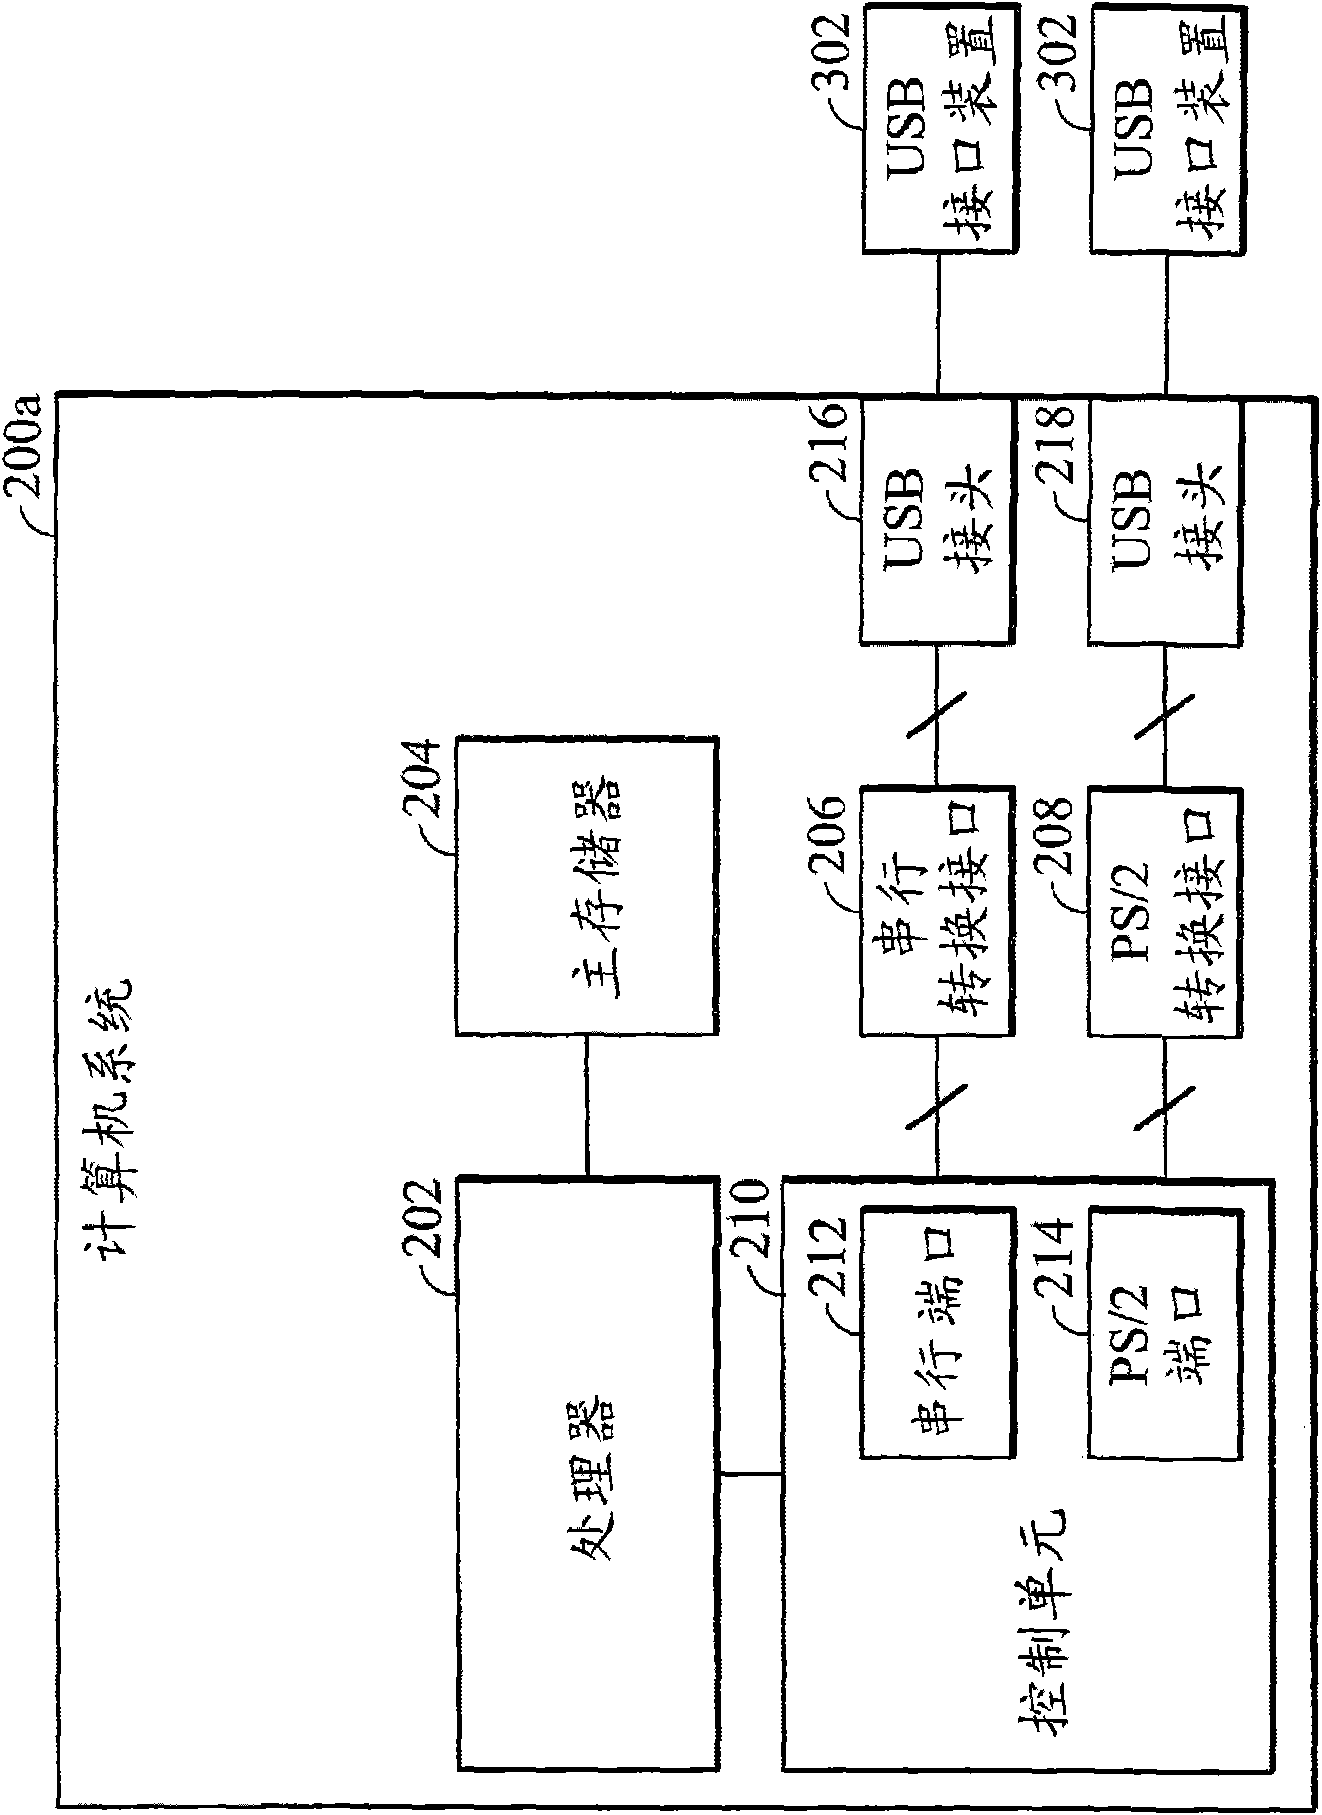 Computer system and peripheral equipment drive method